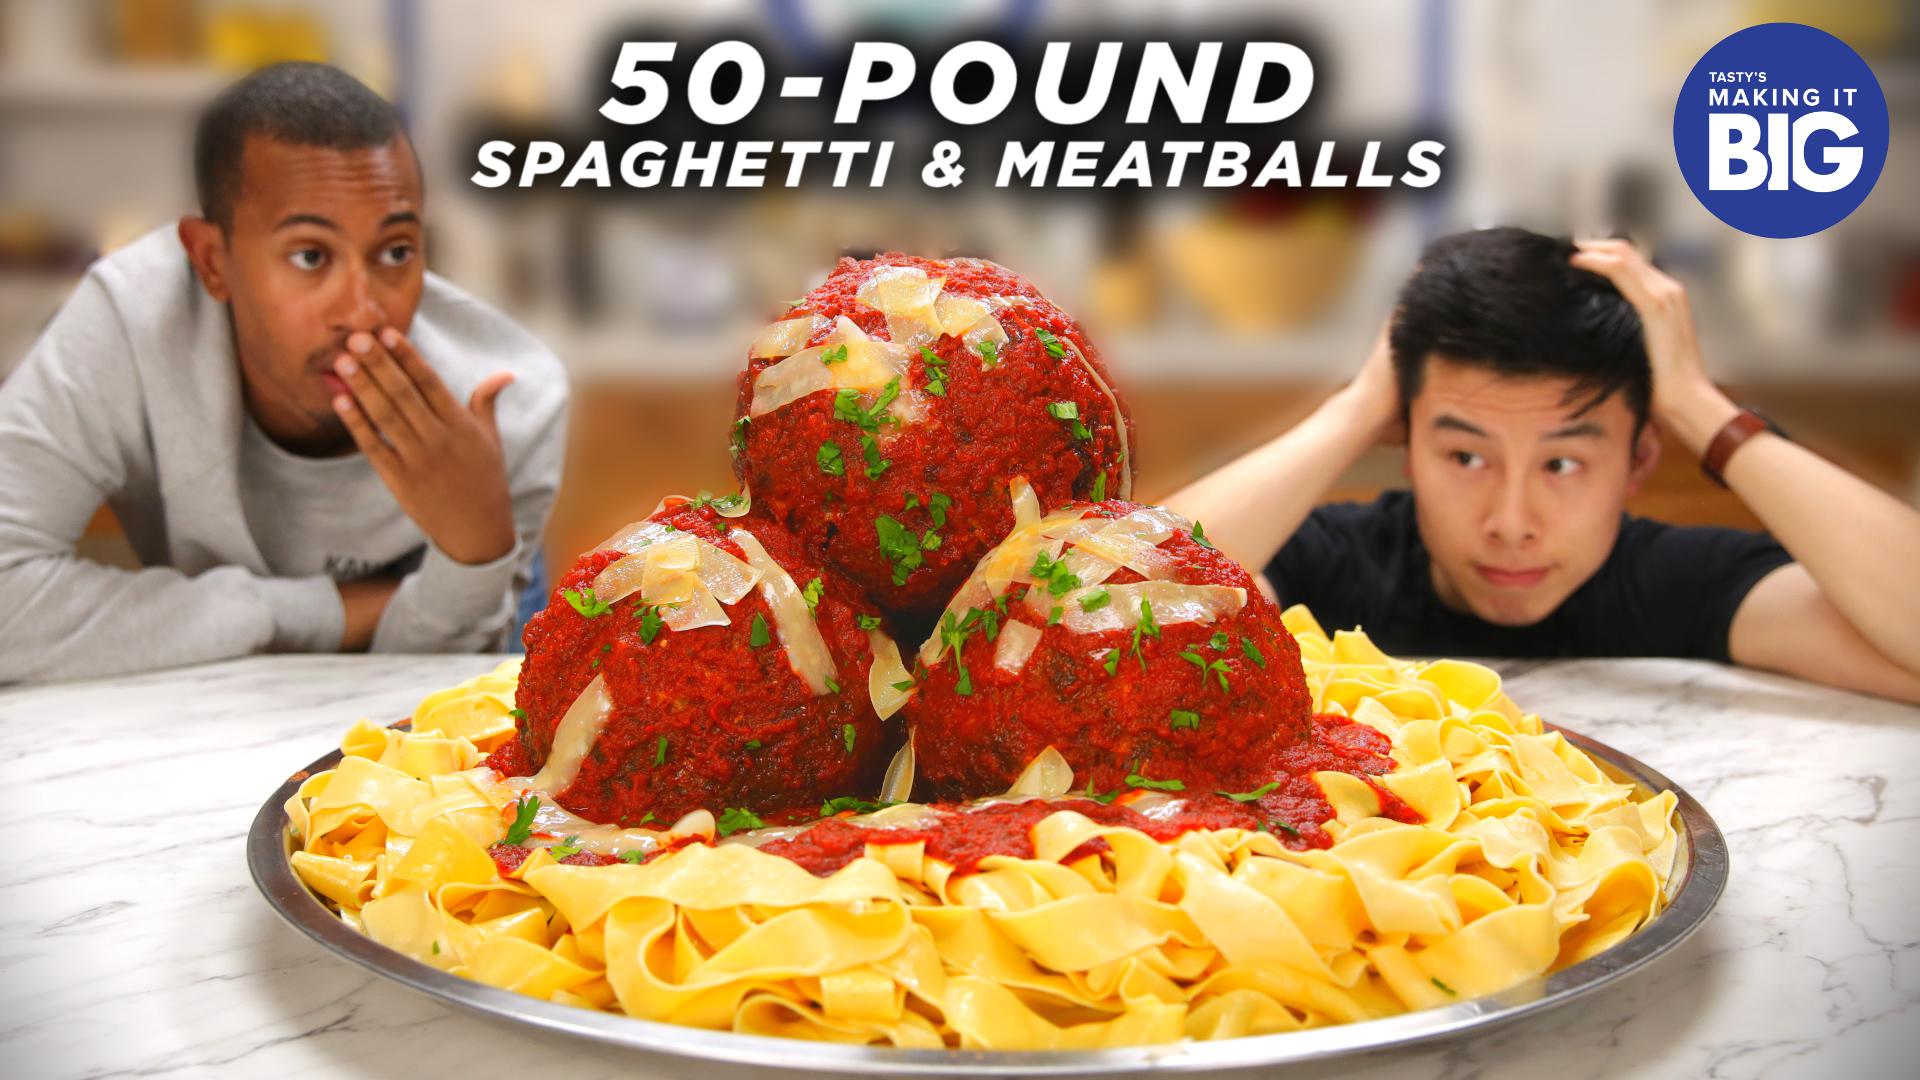 I Made Giant 50-Pound Spaghetti And Meatballs for Kalen Reacts.